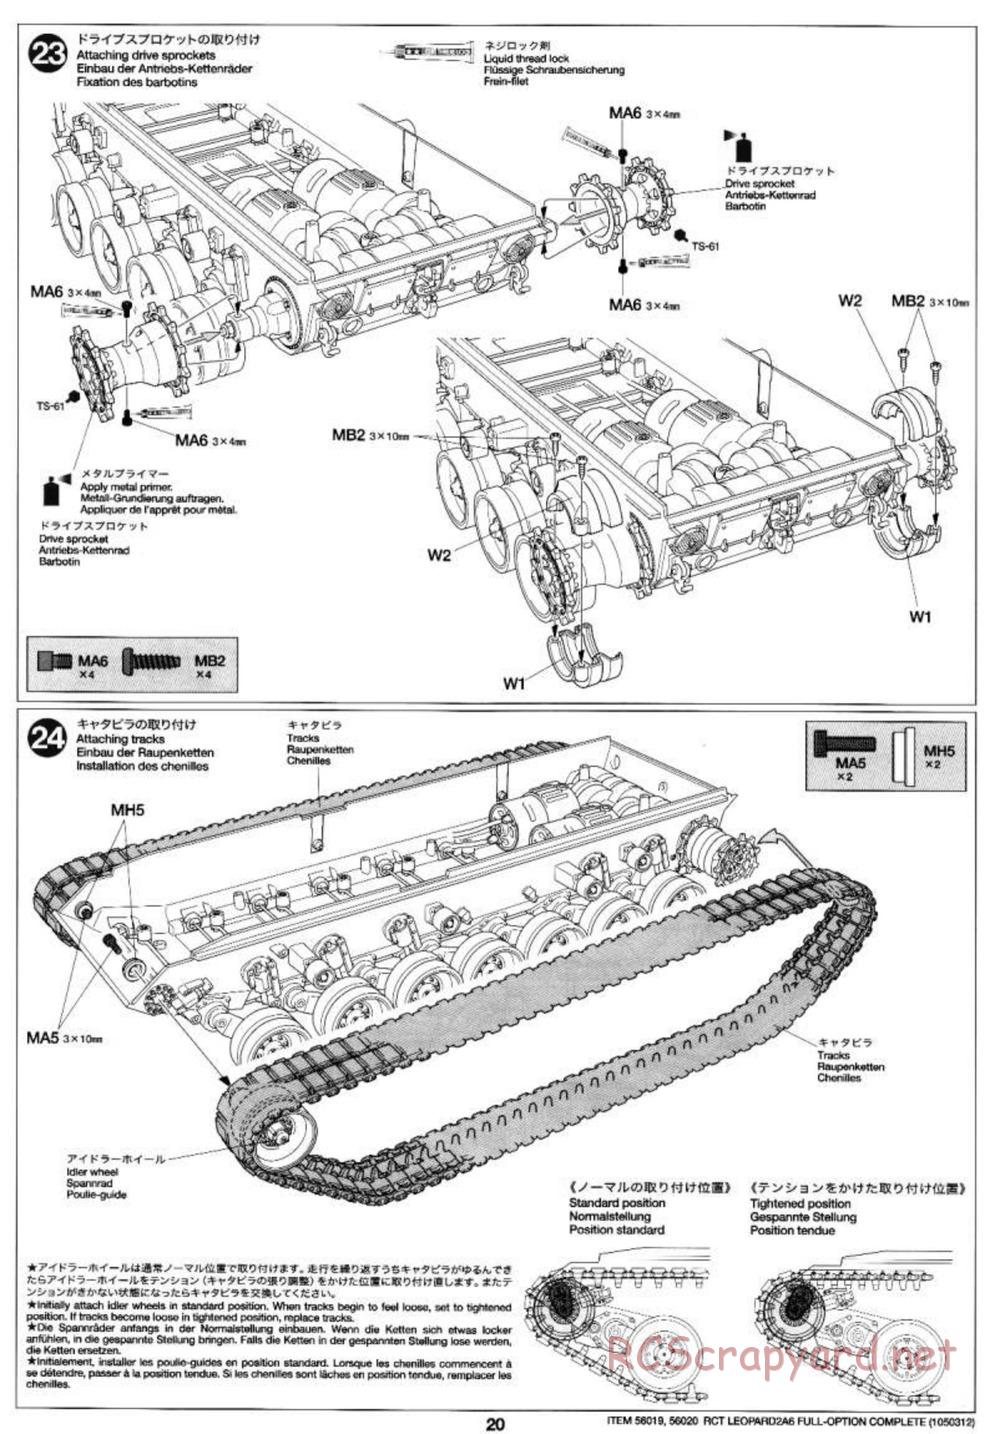 Tamiya - Leopard 2 A6 - 1/16 Scale Chassis - Manual - Page 20